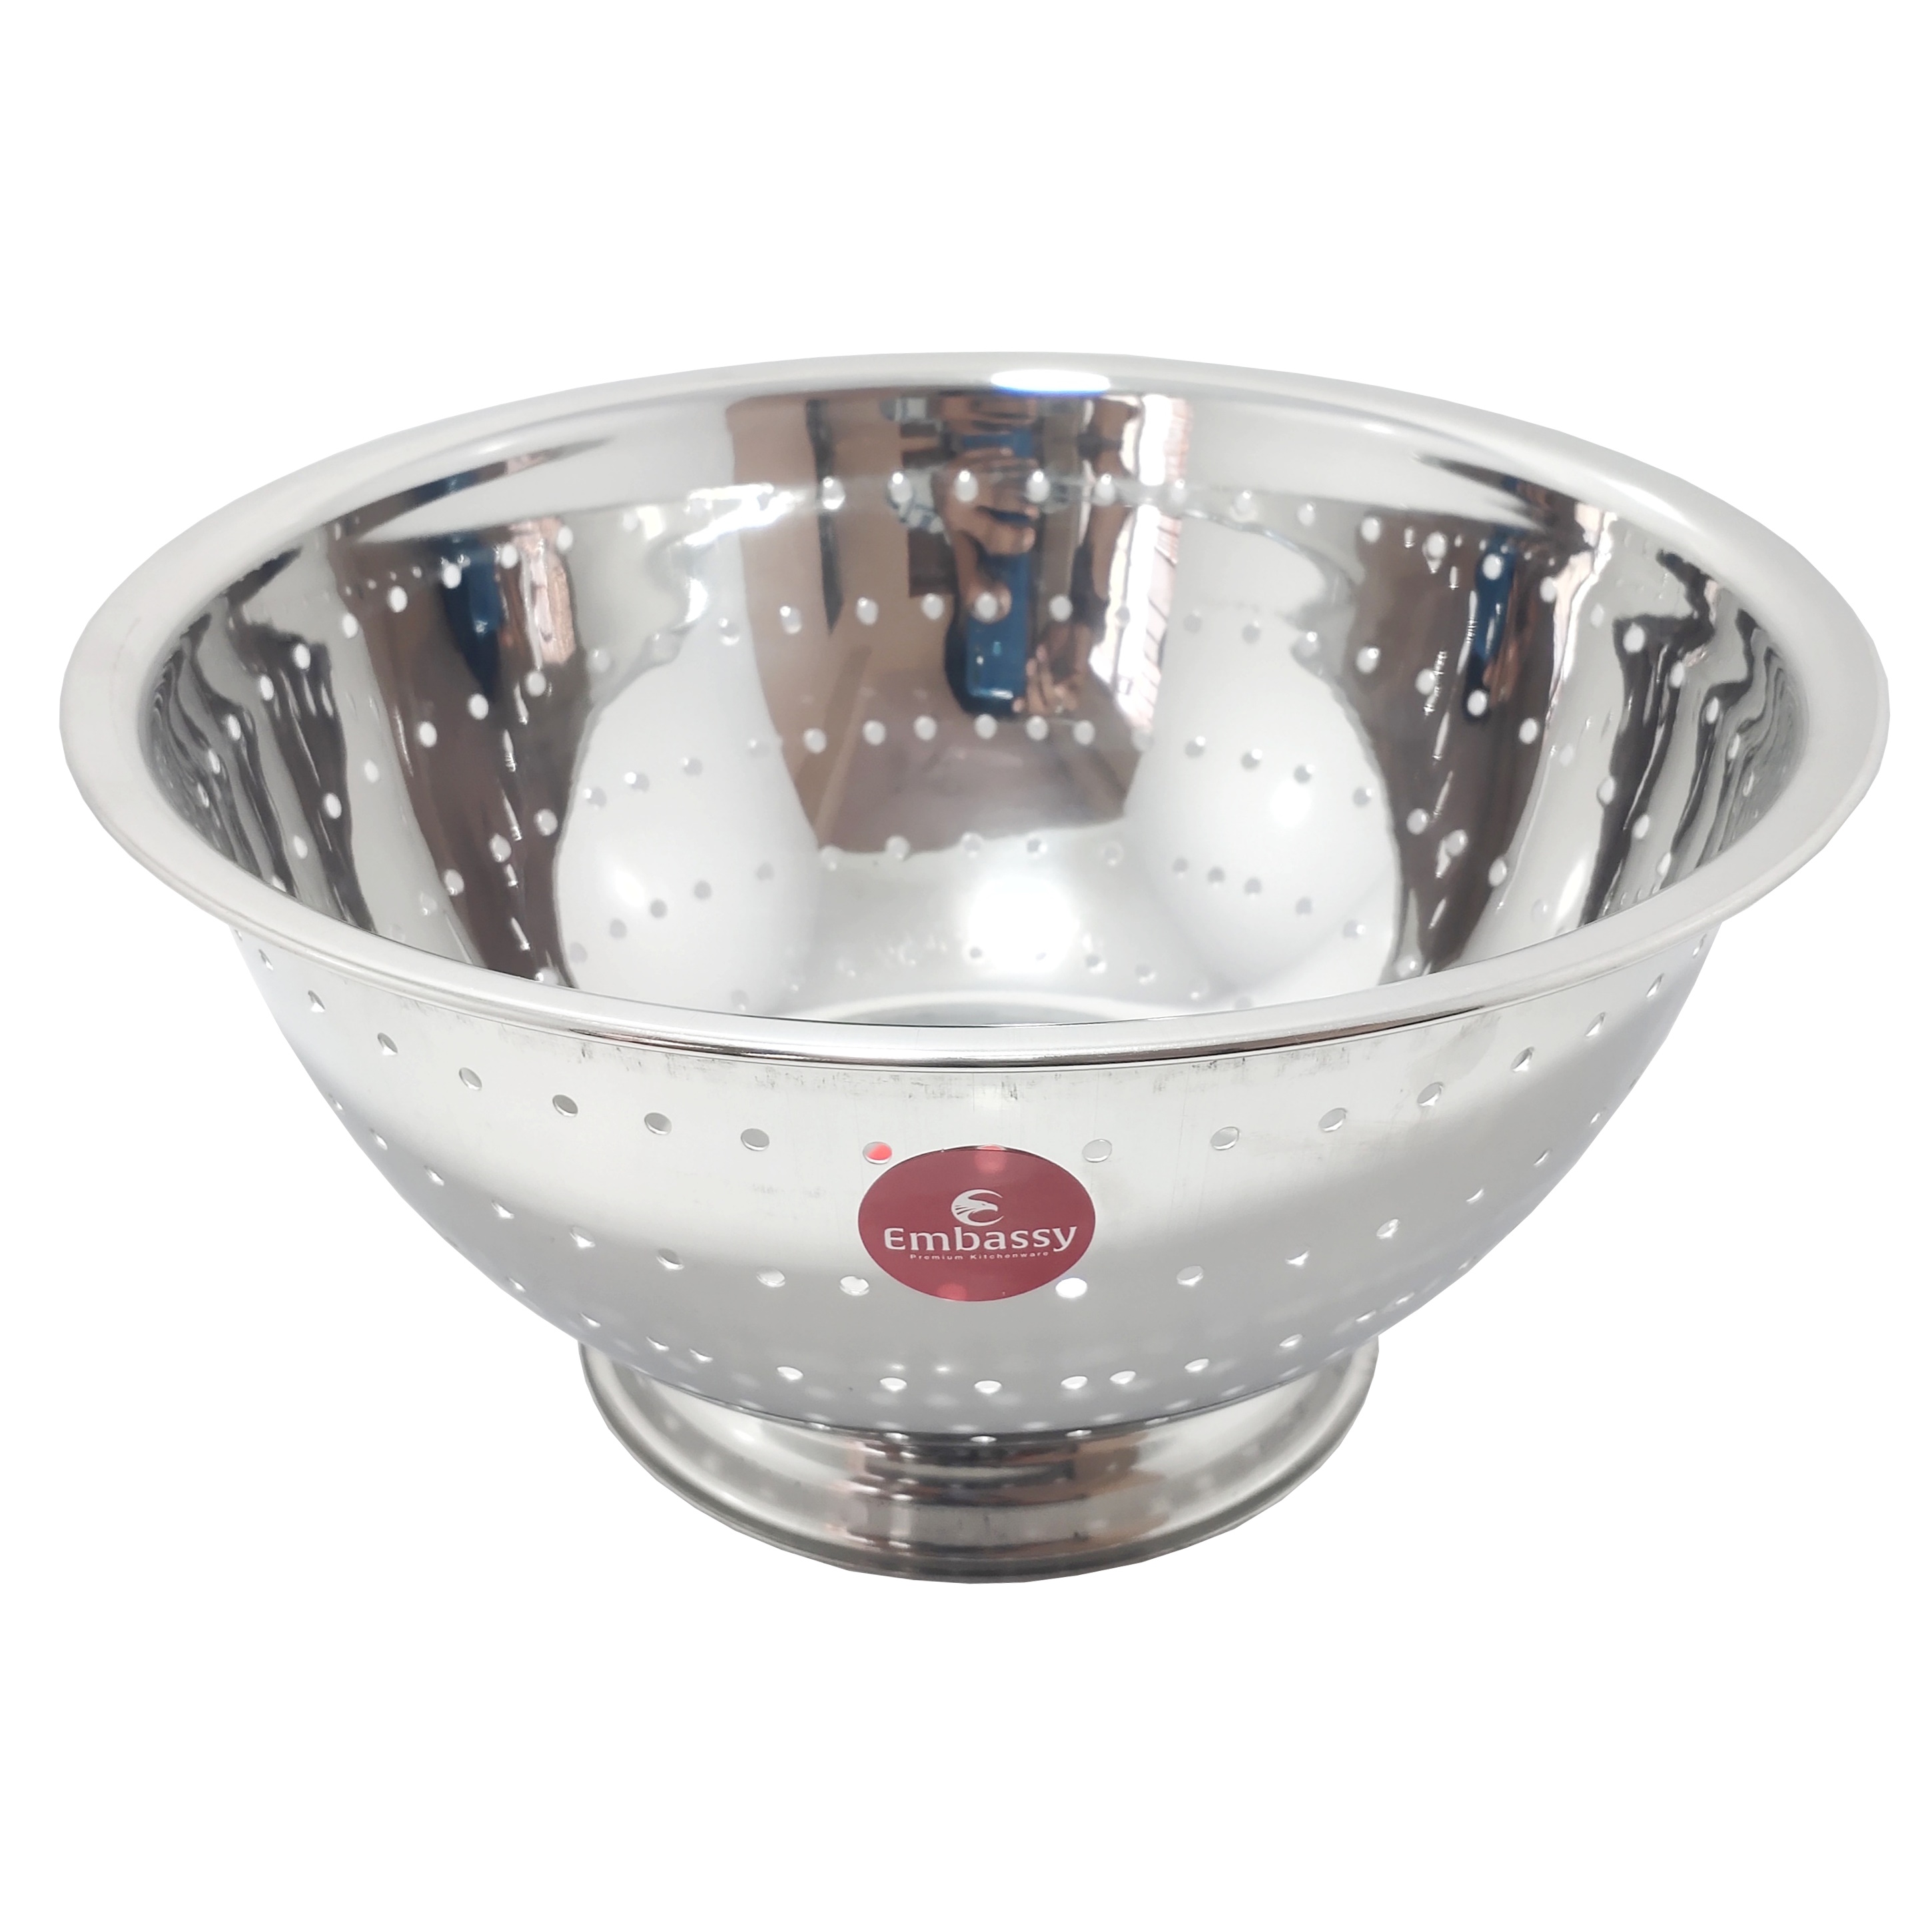 Embassy Stainless Steel Colander Size 05